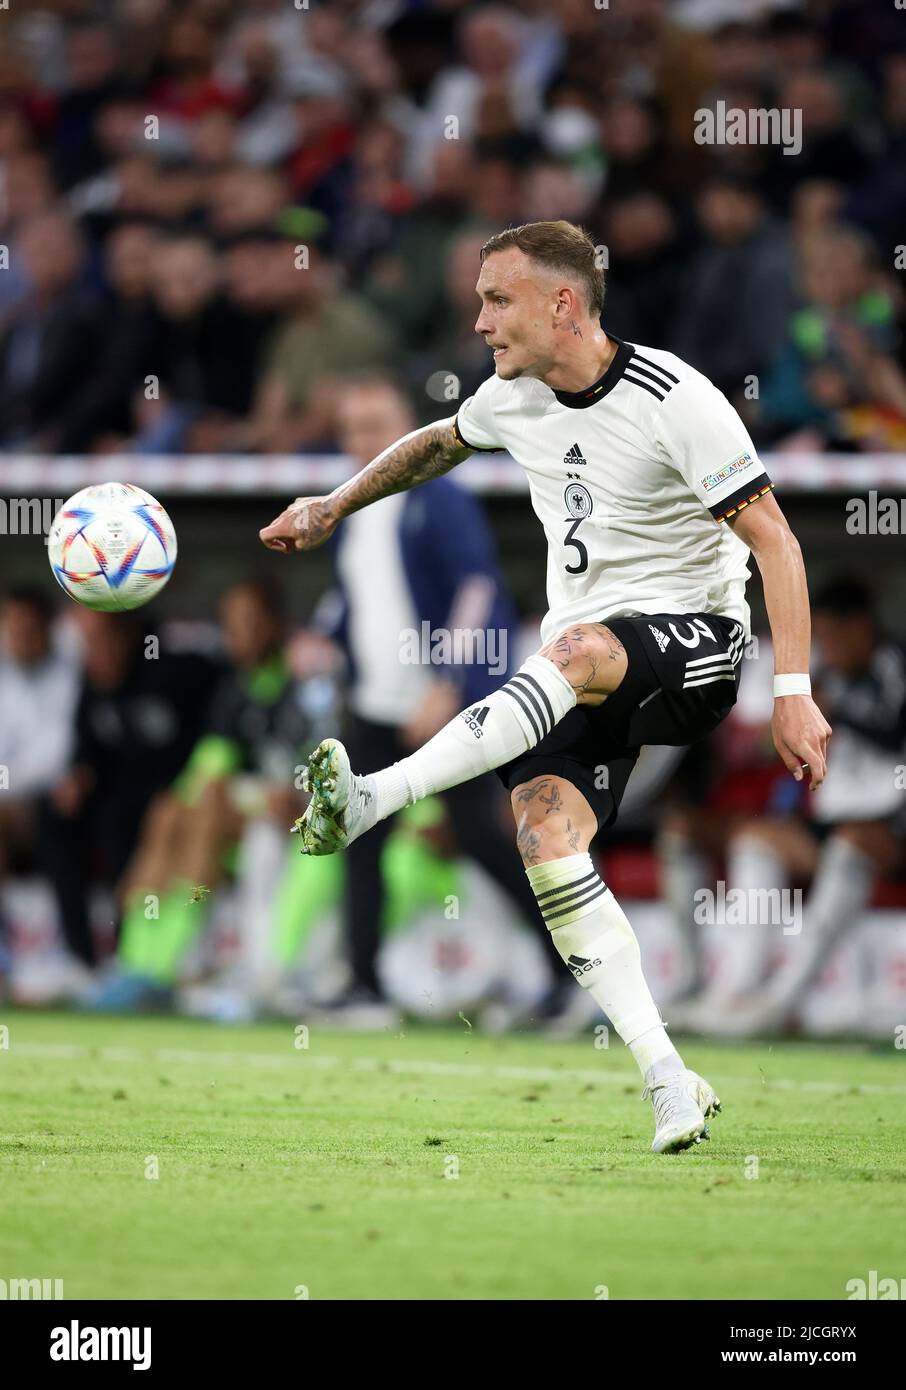 David Raum of Germany  MUNICH, GERMANY - JUNE 07:  UEFA Nations League League A Group 3 match between Germany and England at Allianz Arena on June 07, 2022 in Munich, Germany. Nations League Deutschland England  © diebilderwelt / Alamy Stock Stock Photo